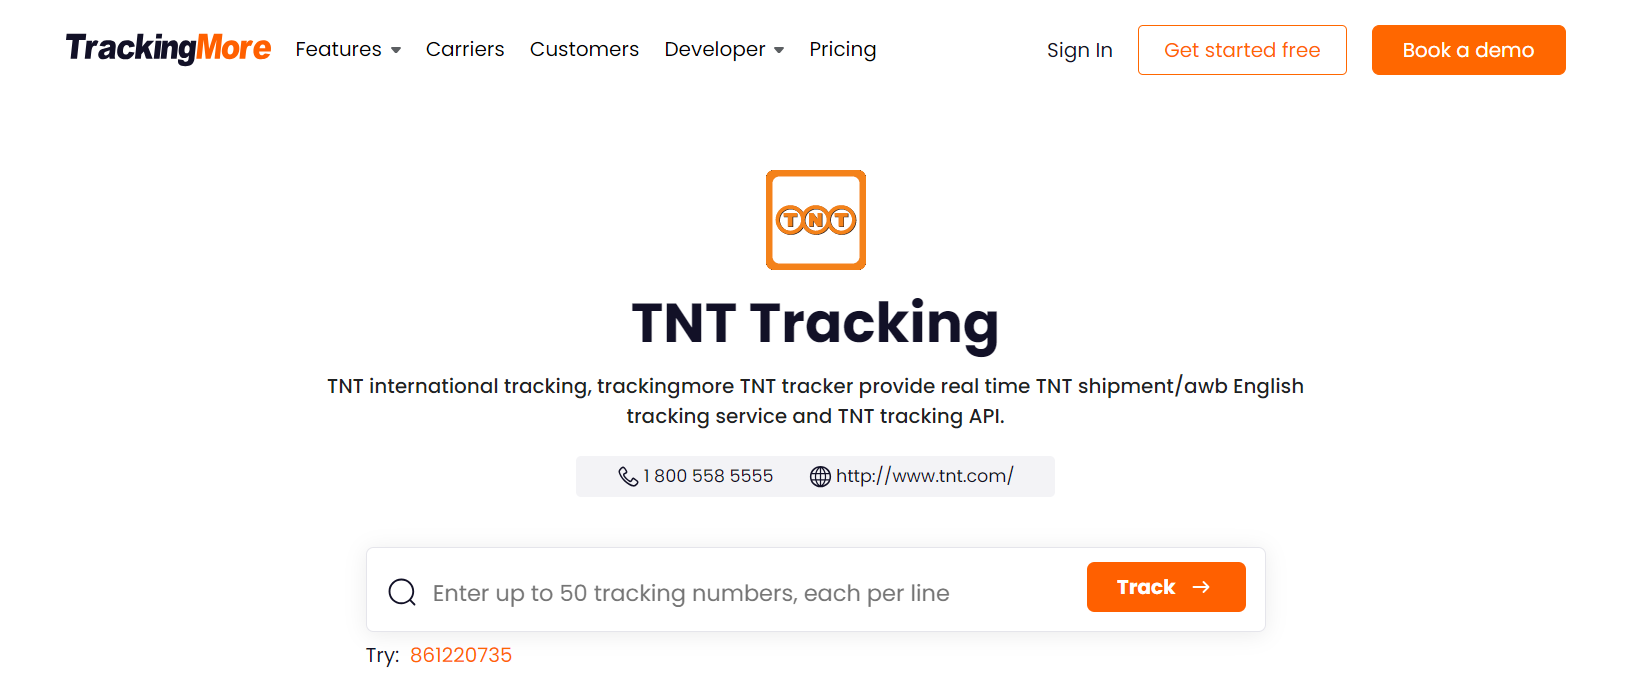 TrackingMore TNT tracking page